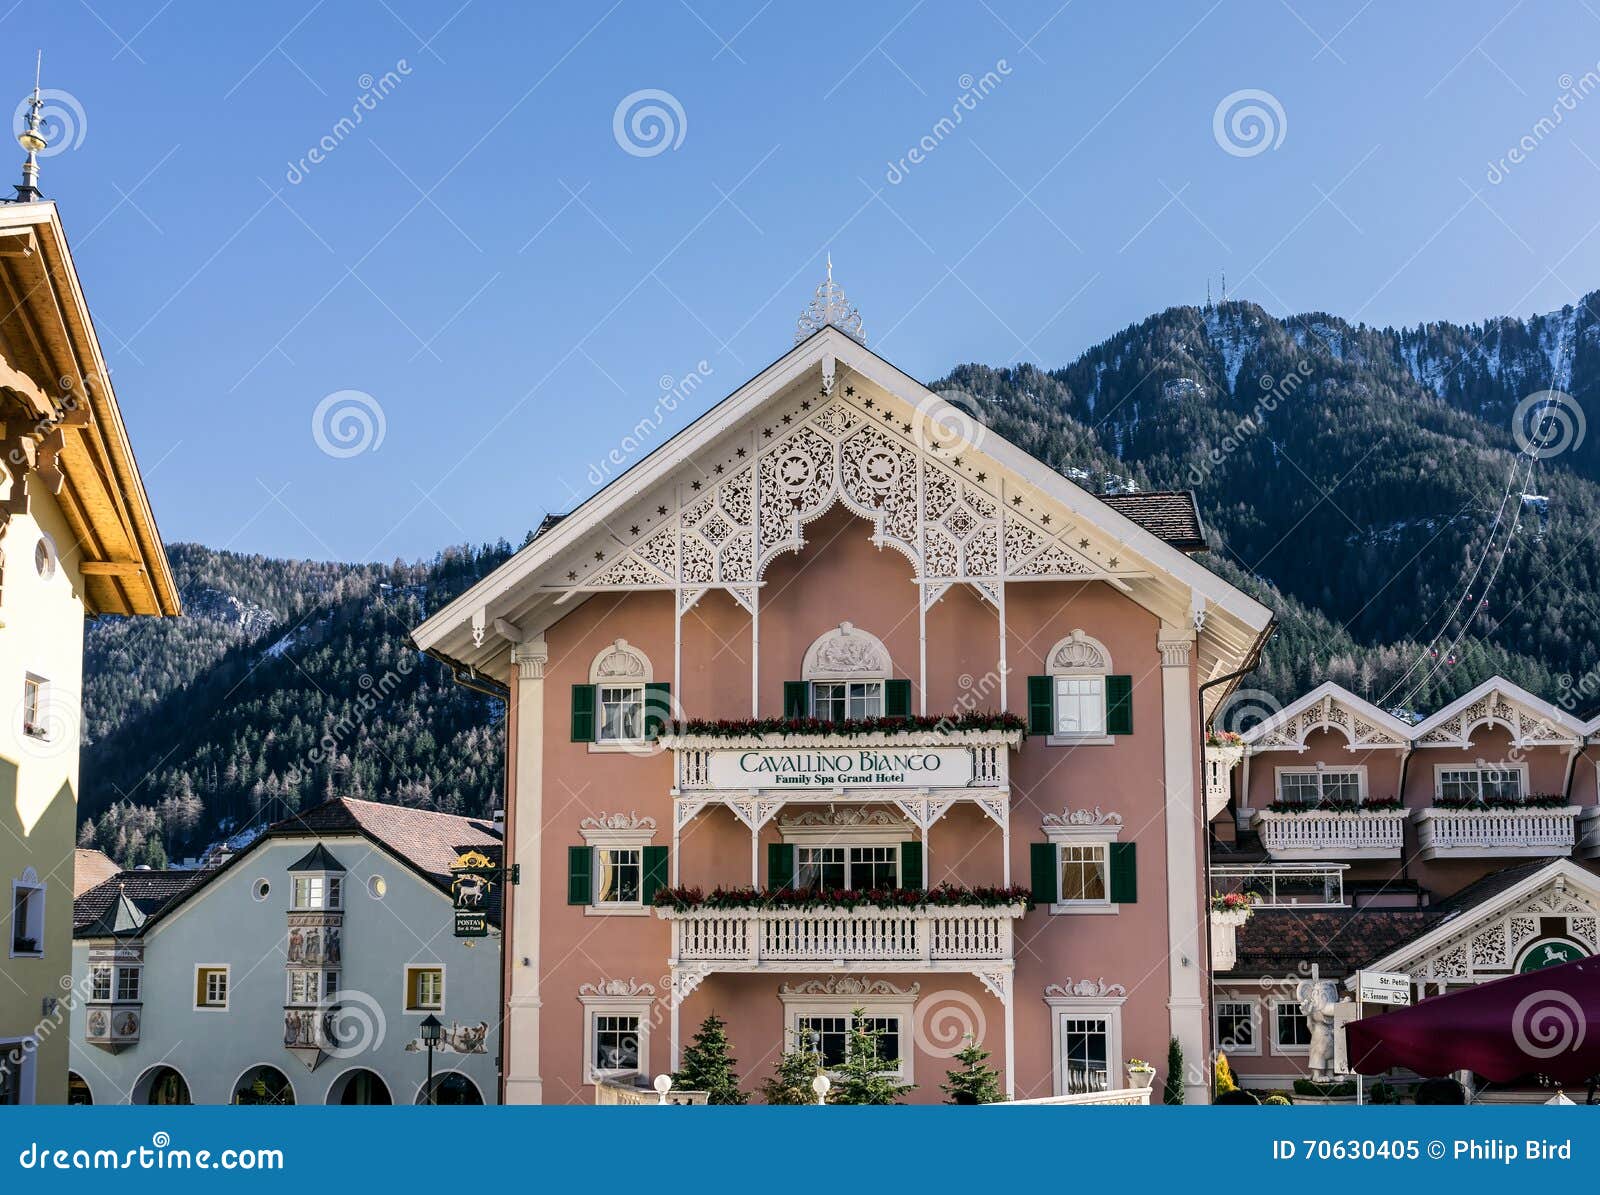 ORTISEI, - MARCH : View of the Cavallino Bianco Hotel in Ortisei Val Gardena in Italy on March 26, 2016 Editorial Image - Image of tirol, valley: 70630405